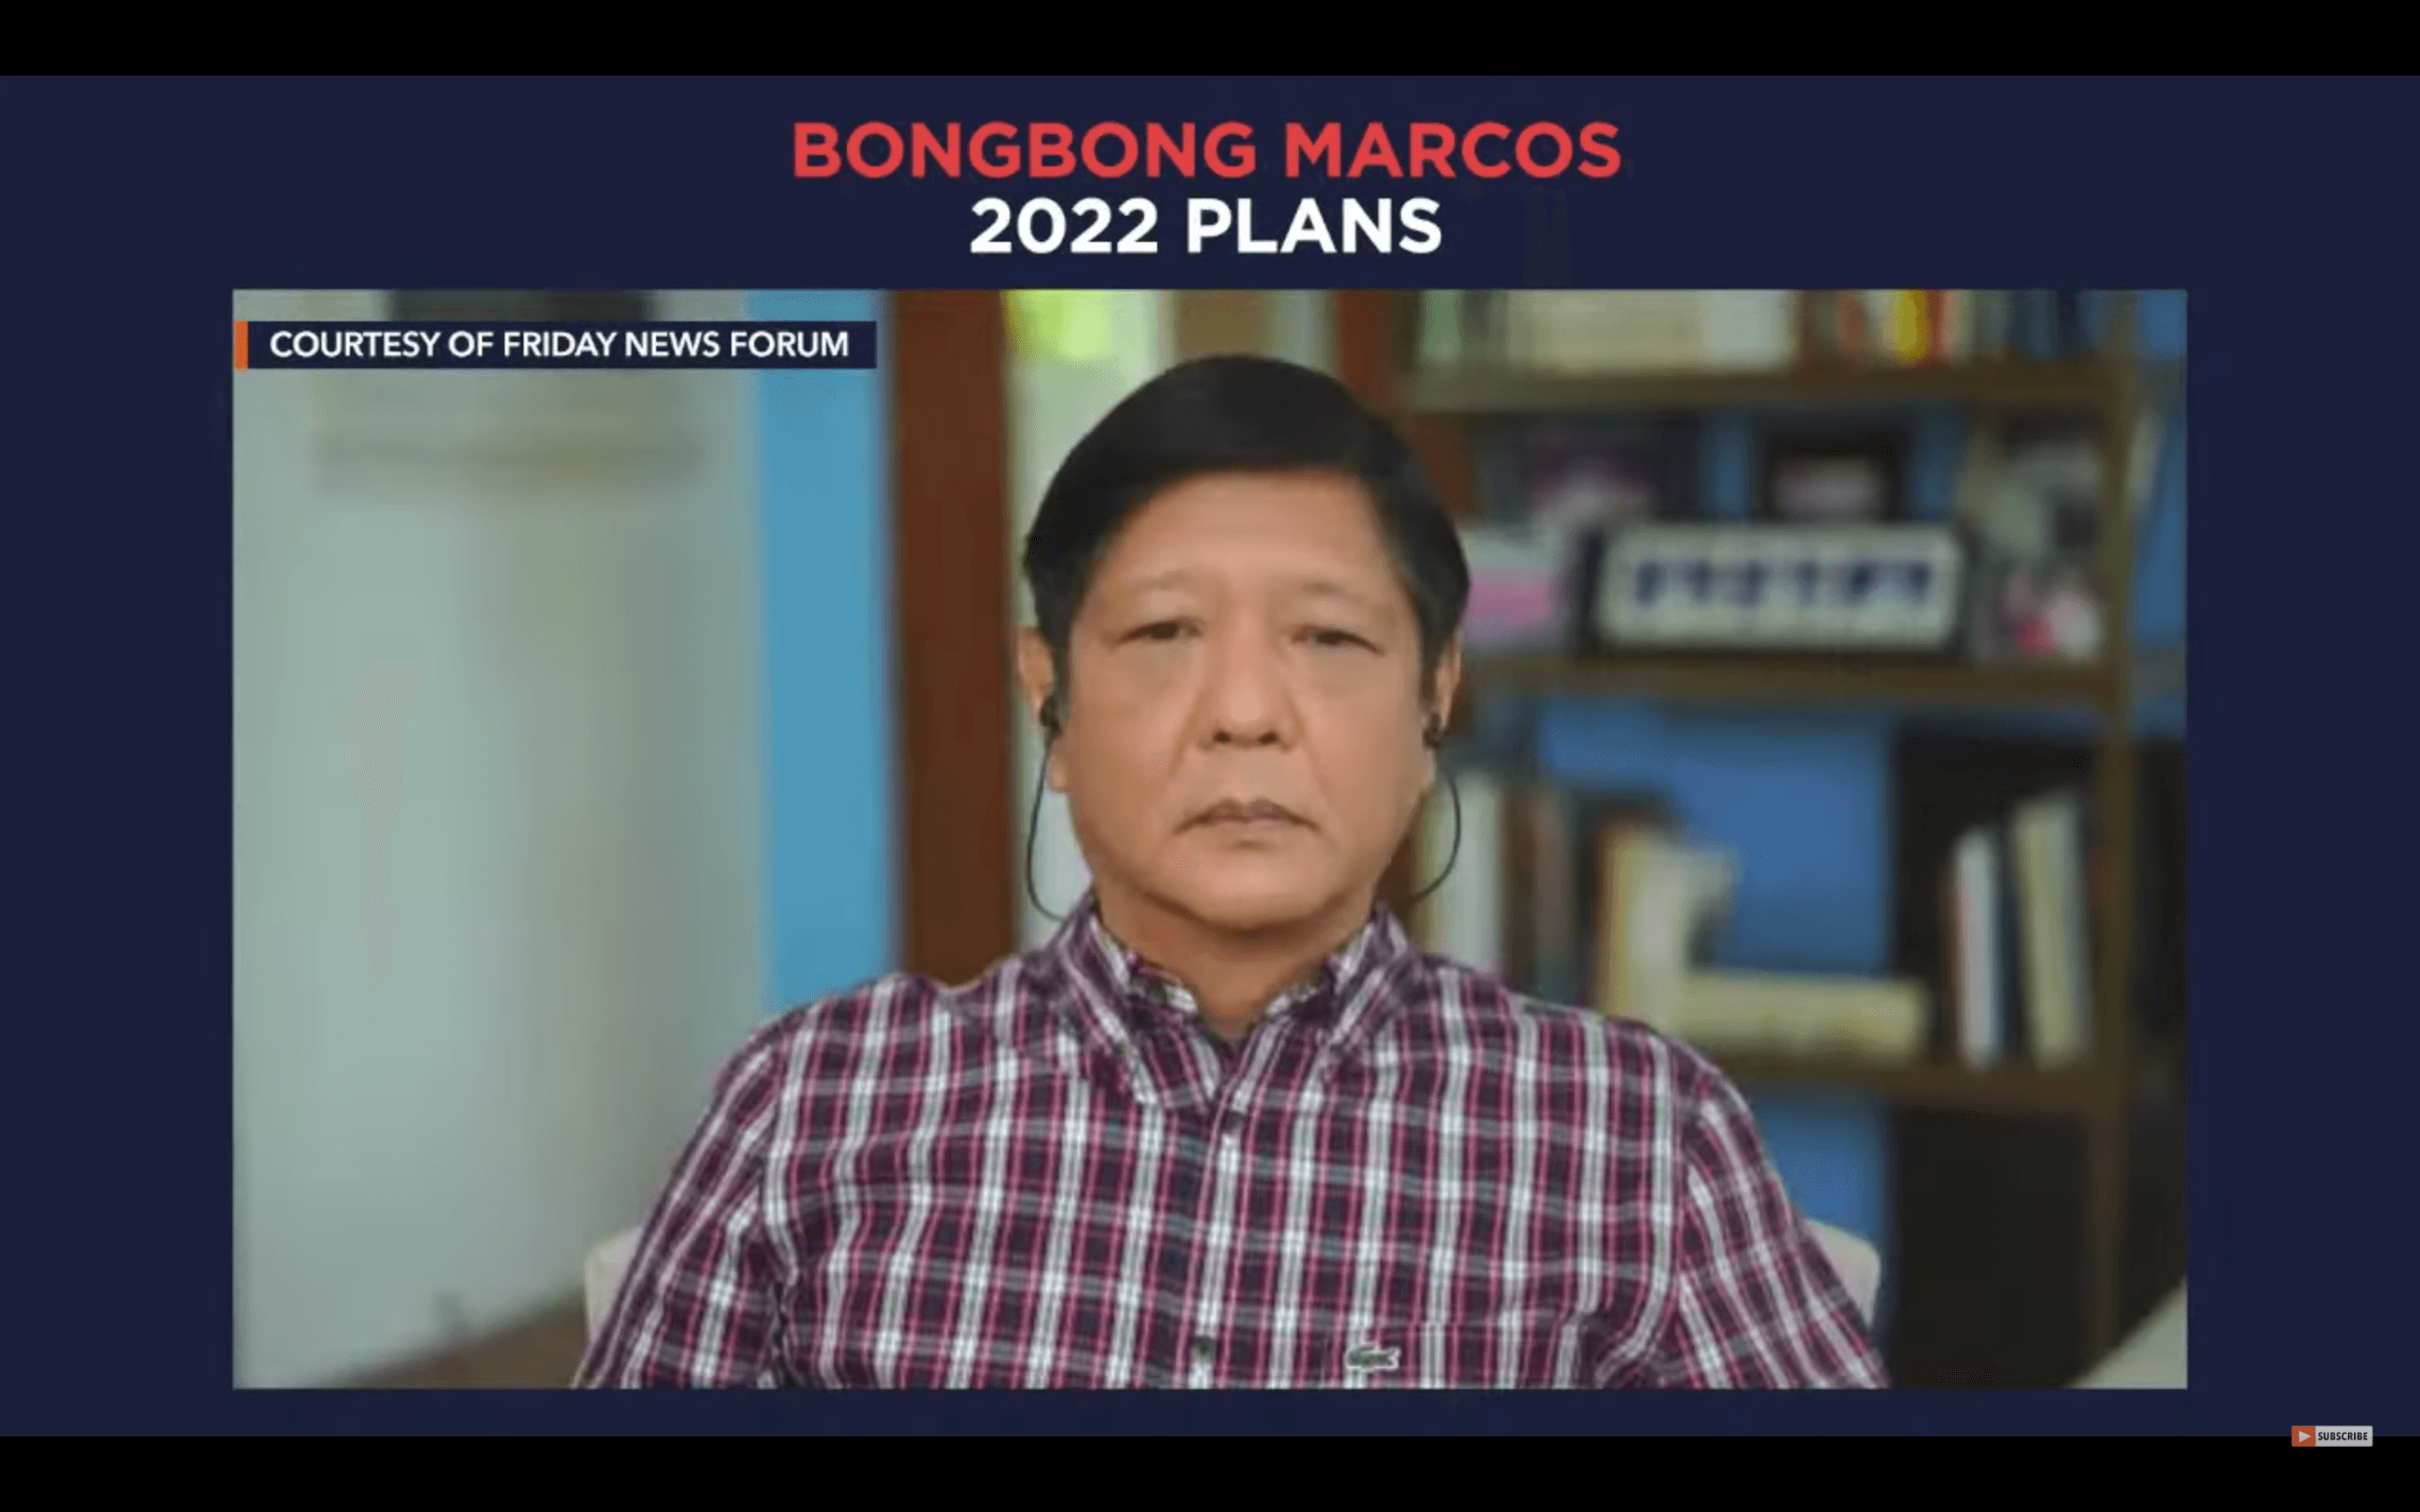 FALSE: Philippines filed case with ICC over West PH Sea in 2010 – Bongbong Marcos